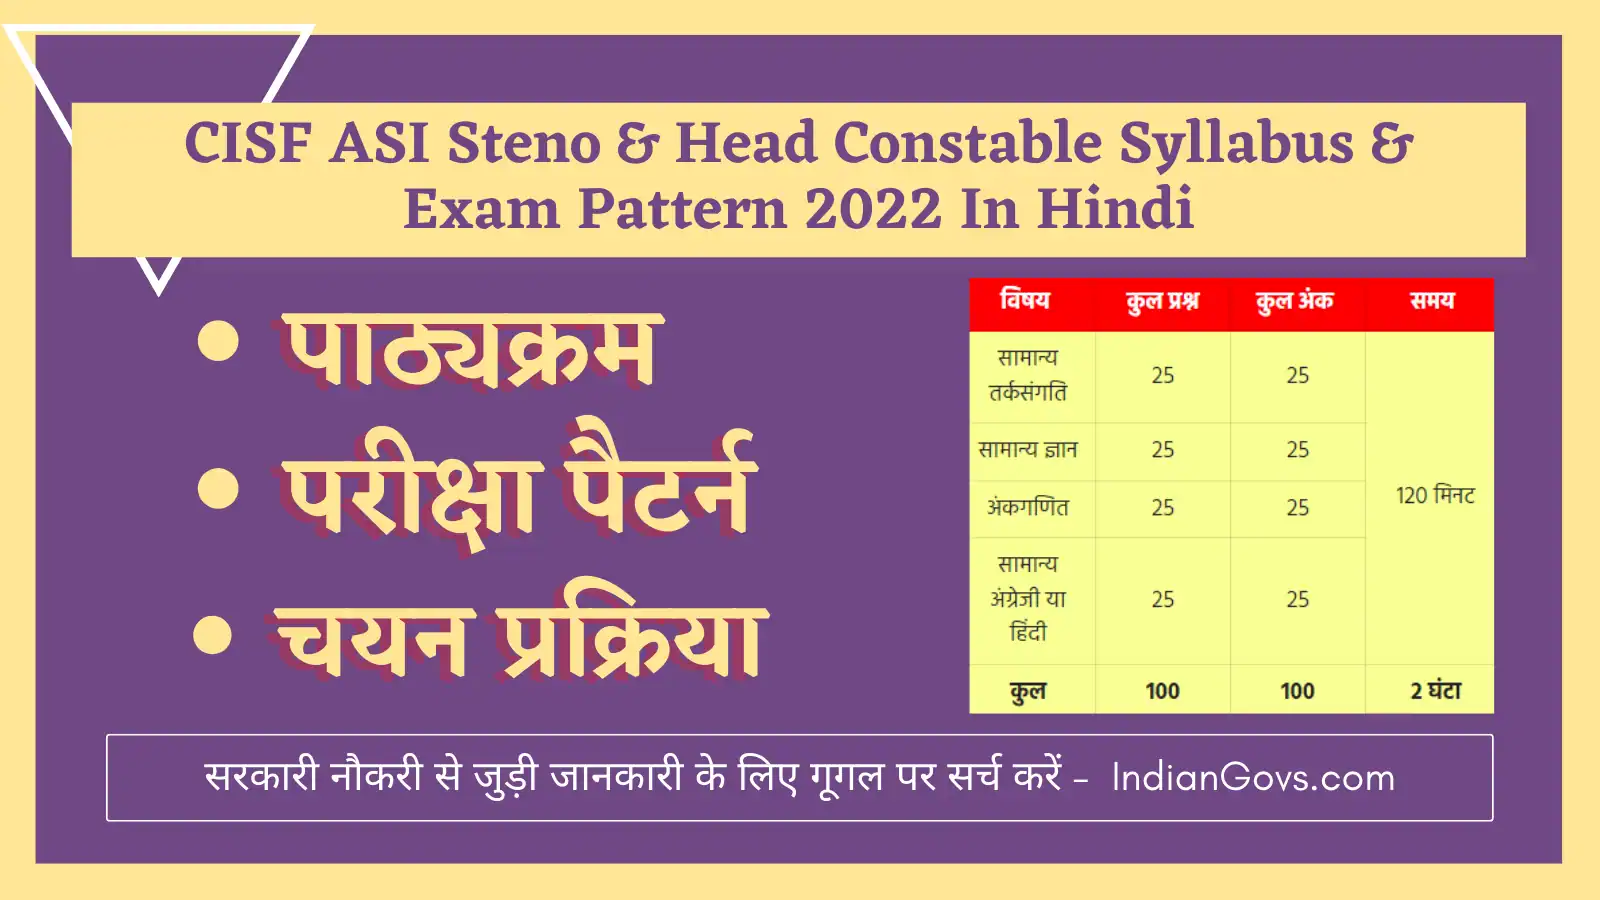 CISF ASI Stenographer & Head Constable Syllabus And Exam Pattern 2022 In Hindi